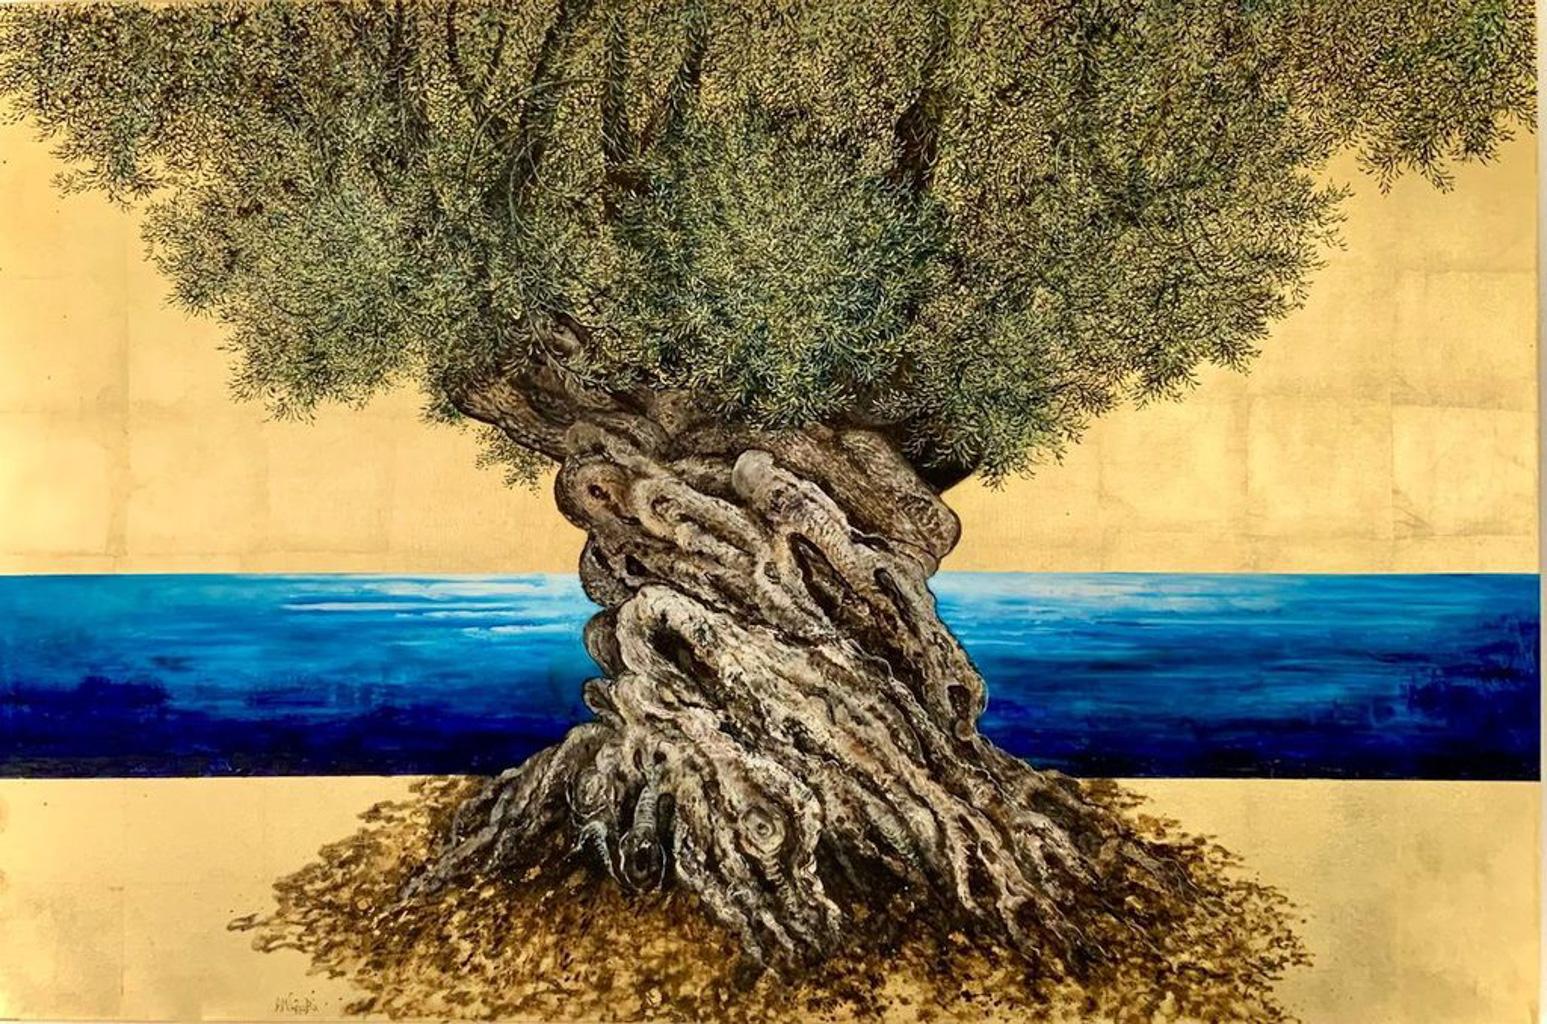 Anastasia Gklava Landscape Painting - "Make Room for the Time", oil and gold leaf painting of olive tree and blue sea